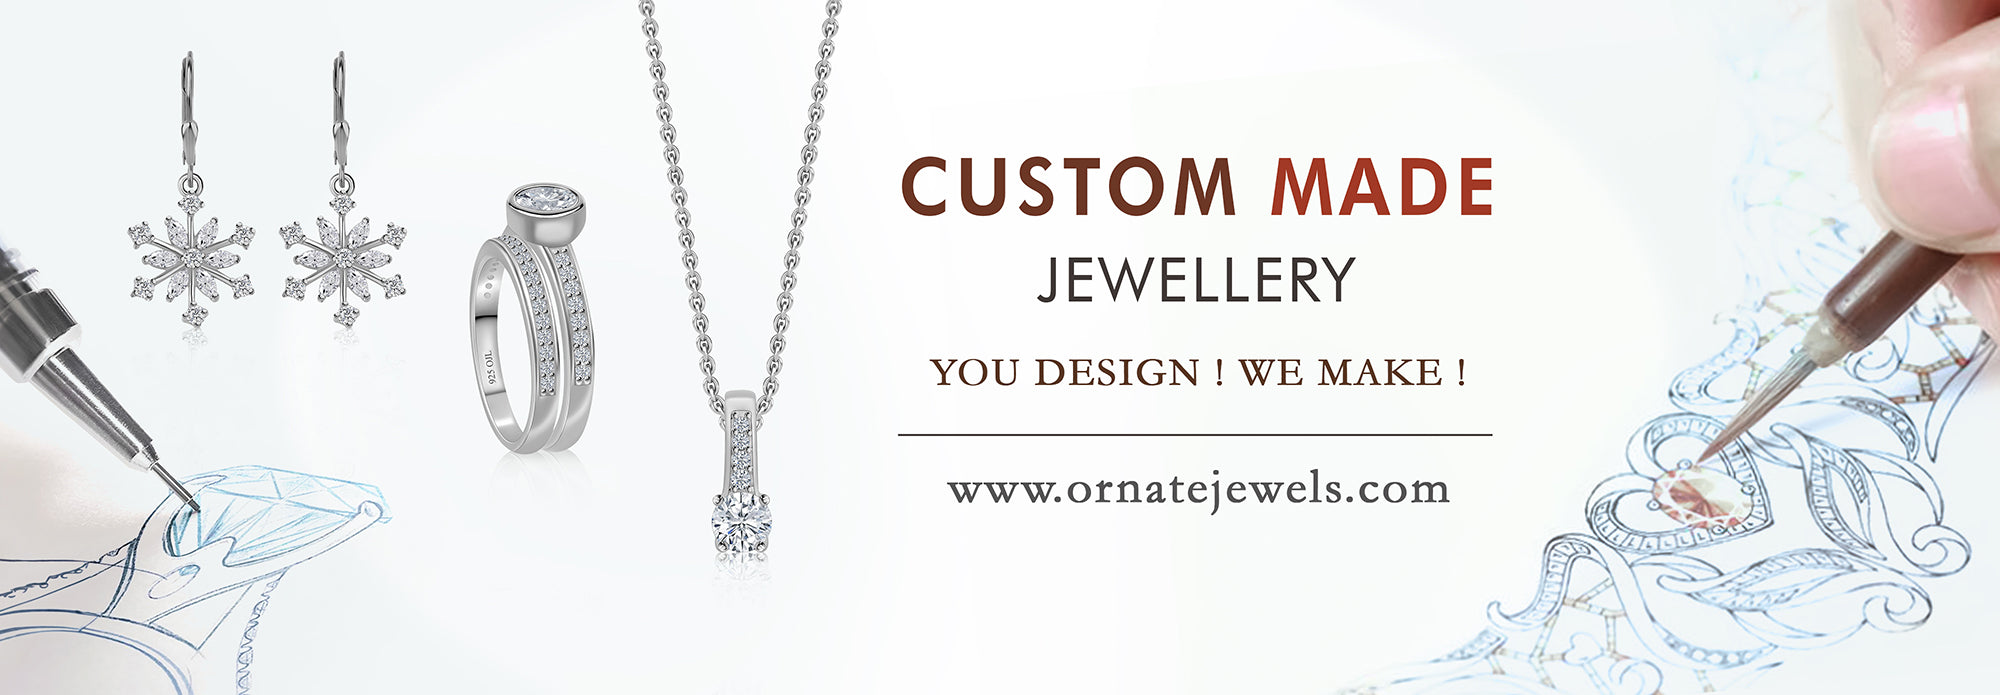 How To get Custom jewellery Made online 